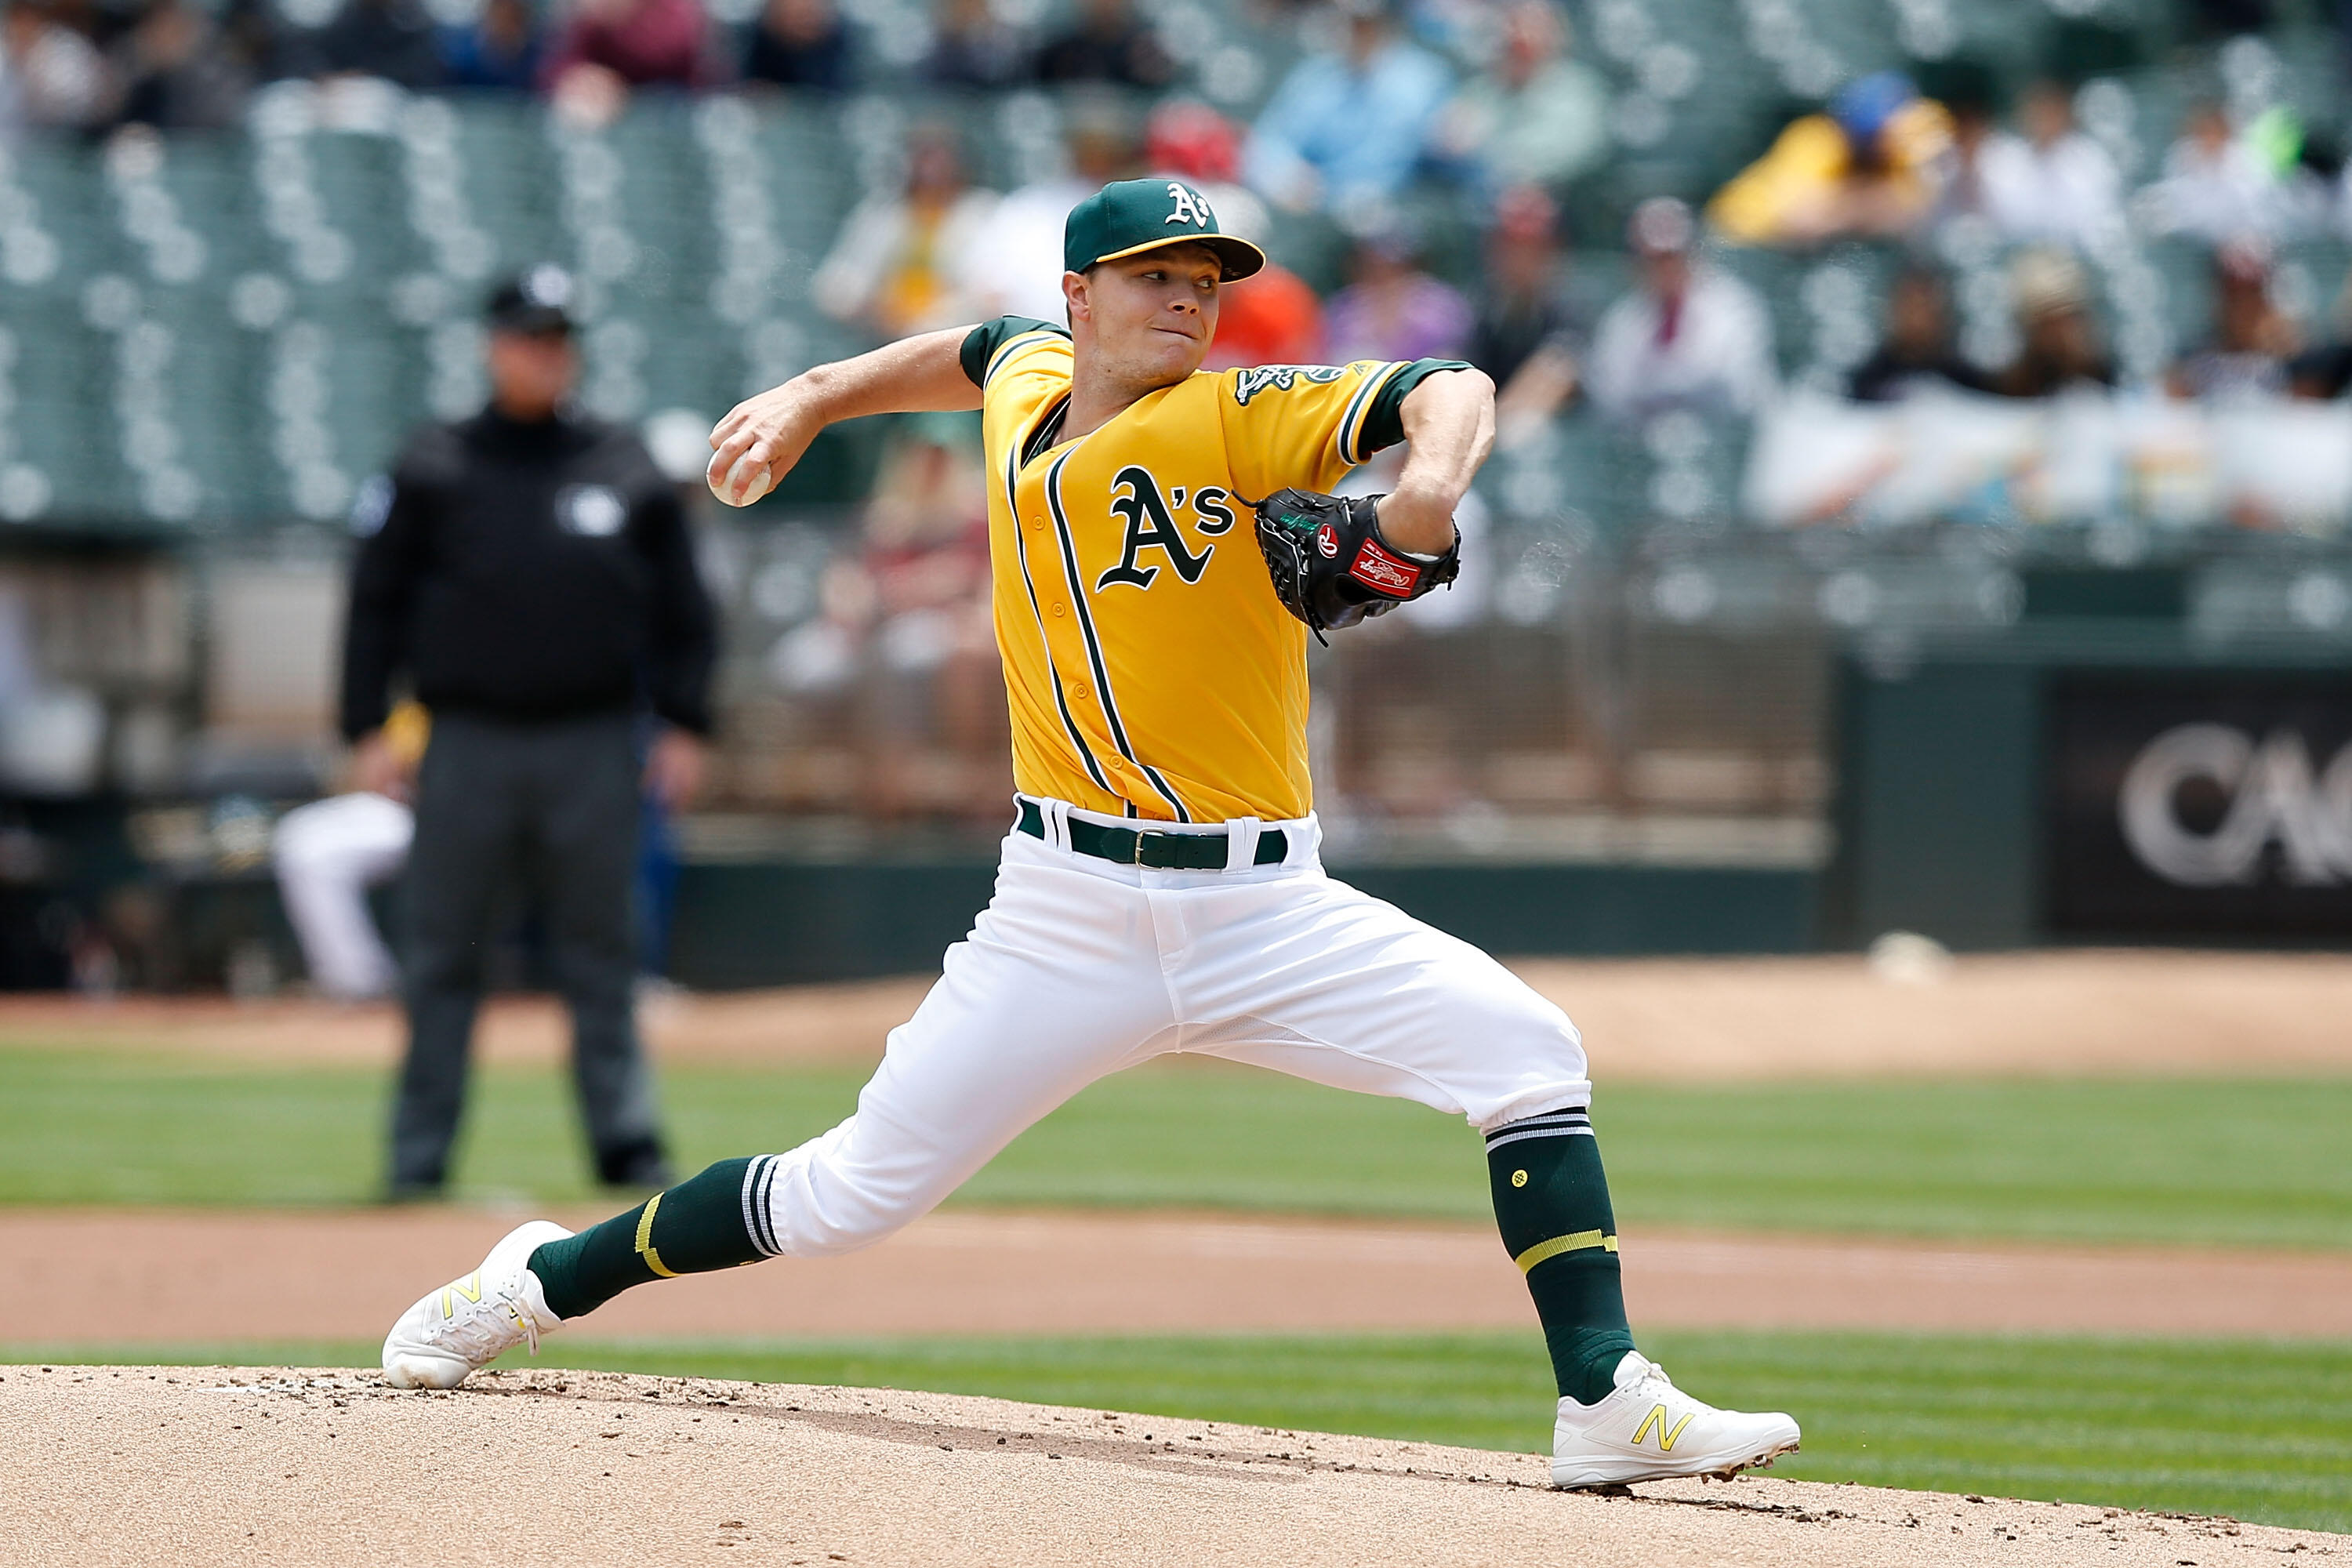 OAKLAND, CA - MAY 24: Sonny Gray #54 of the Oakland Athletics pitches in the first inning against the Miami Marlins at Oakland Alameda Coliseum on May 24, 2017 in Oakland, California. (Photo by Lachlan Cunningham/Getty Images)